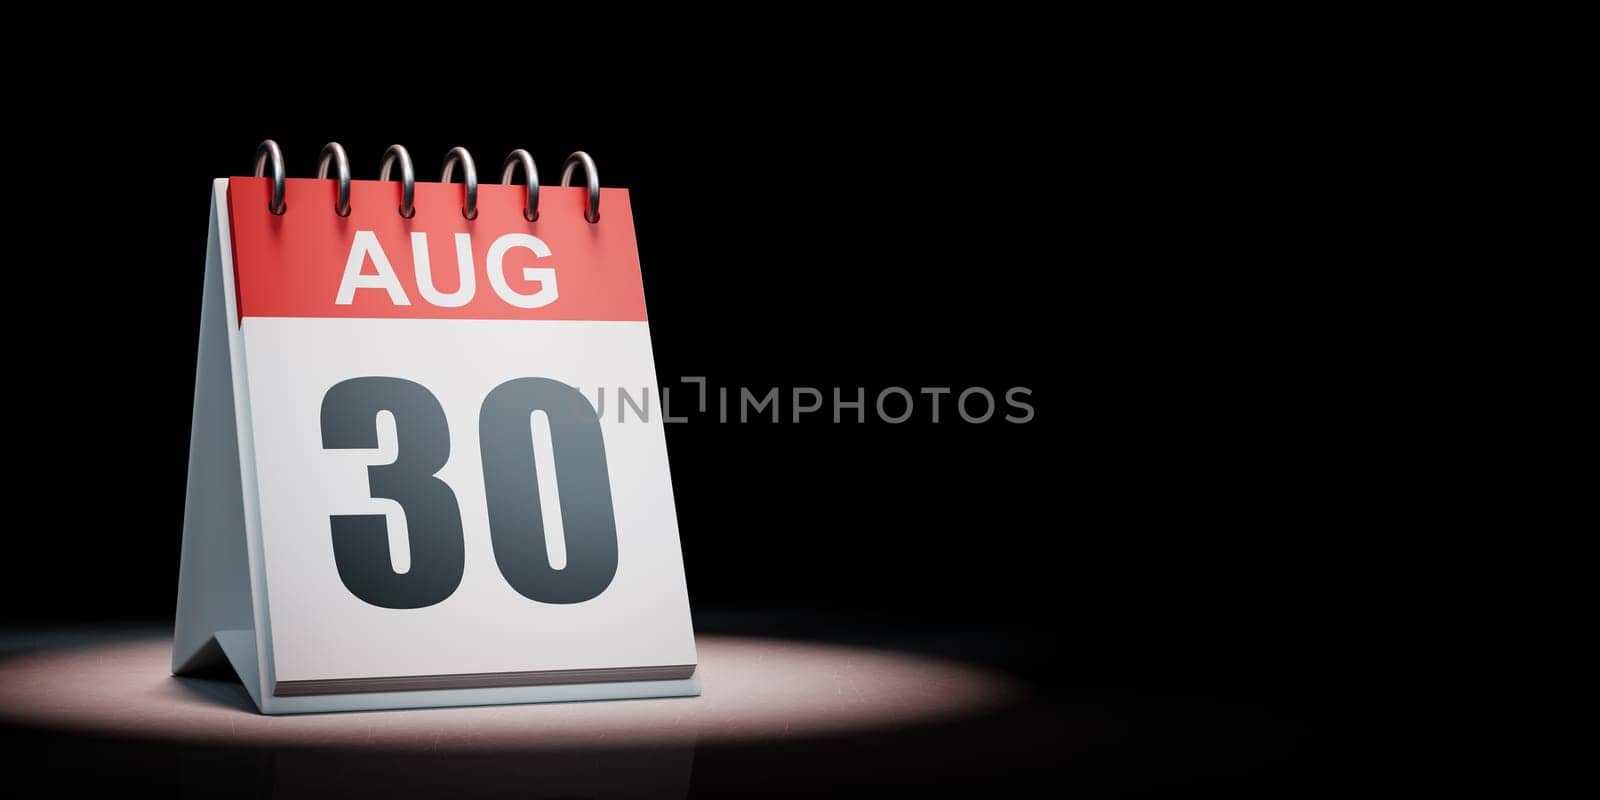 Red and White August 30 Desk Calendar Spotlighted on Black Background with Copy Space 3D Illustration